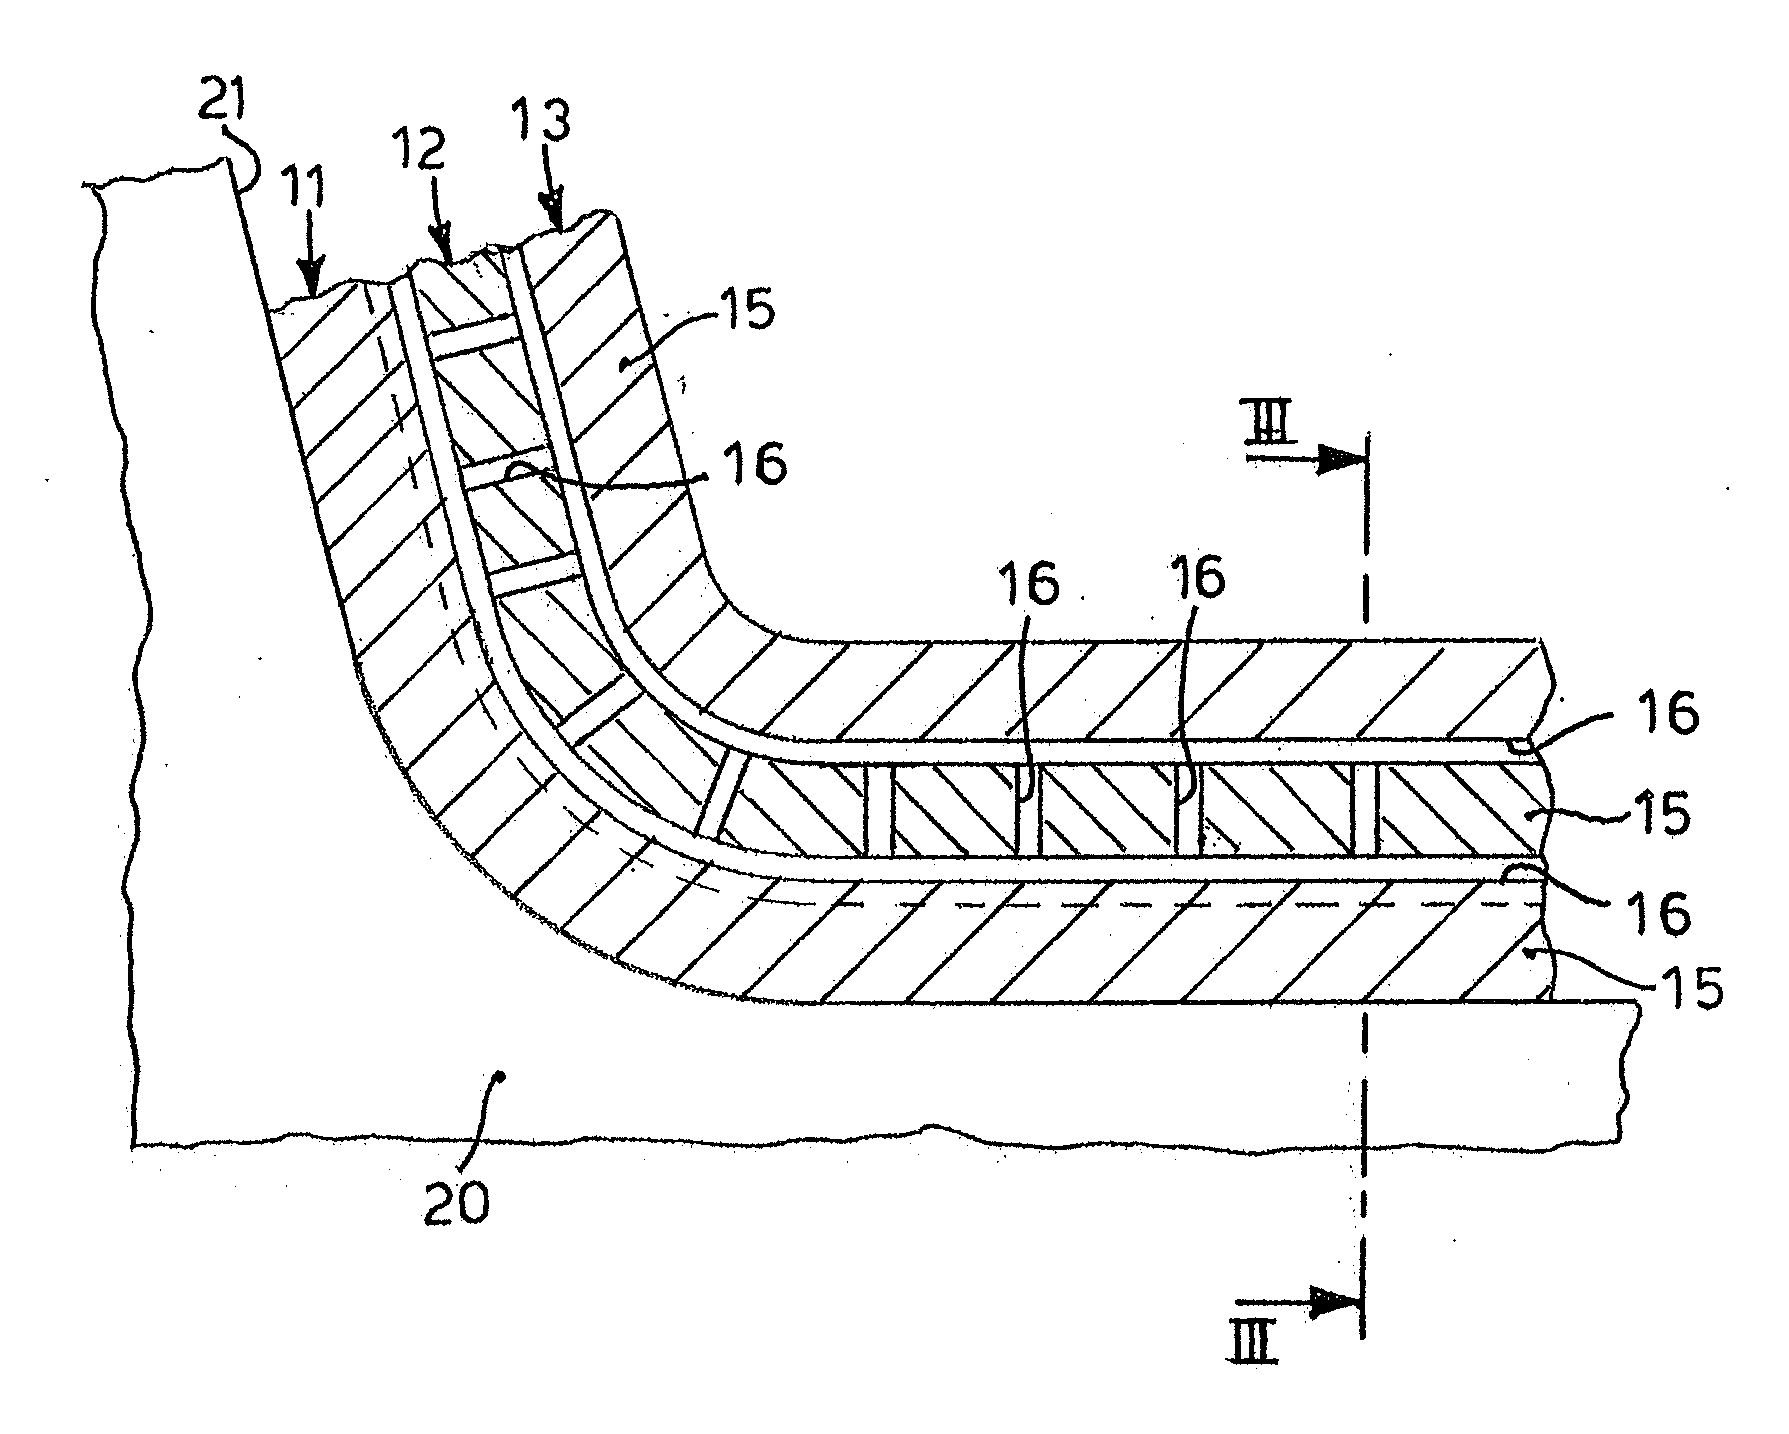 Multilayer structure and method to produce a multilayer structure